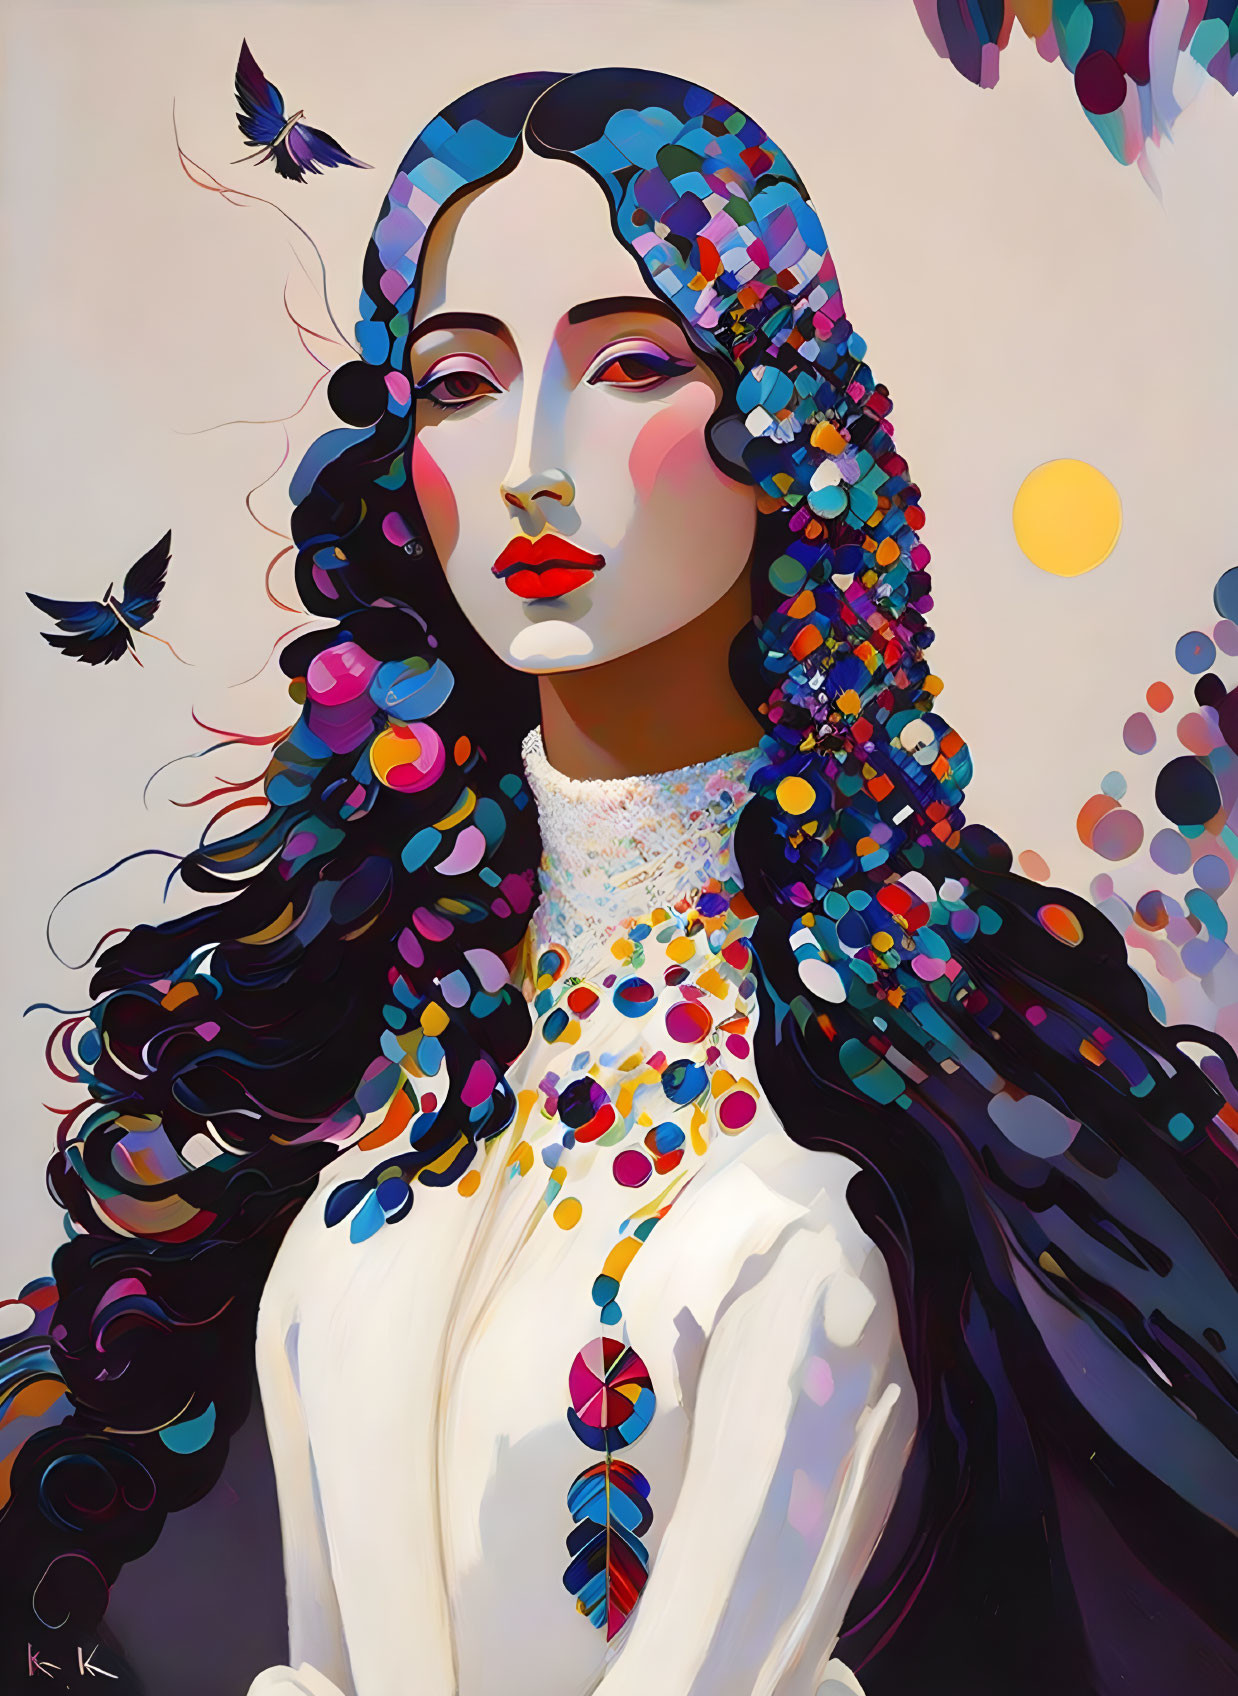 Colorful painting of woman with dark hair and butterflies on cream background